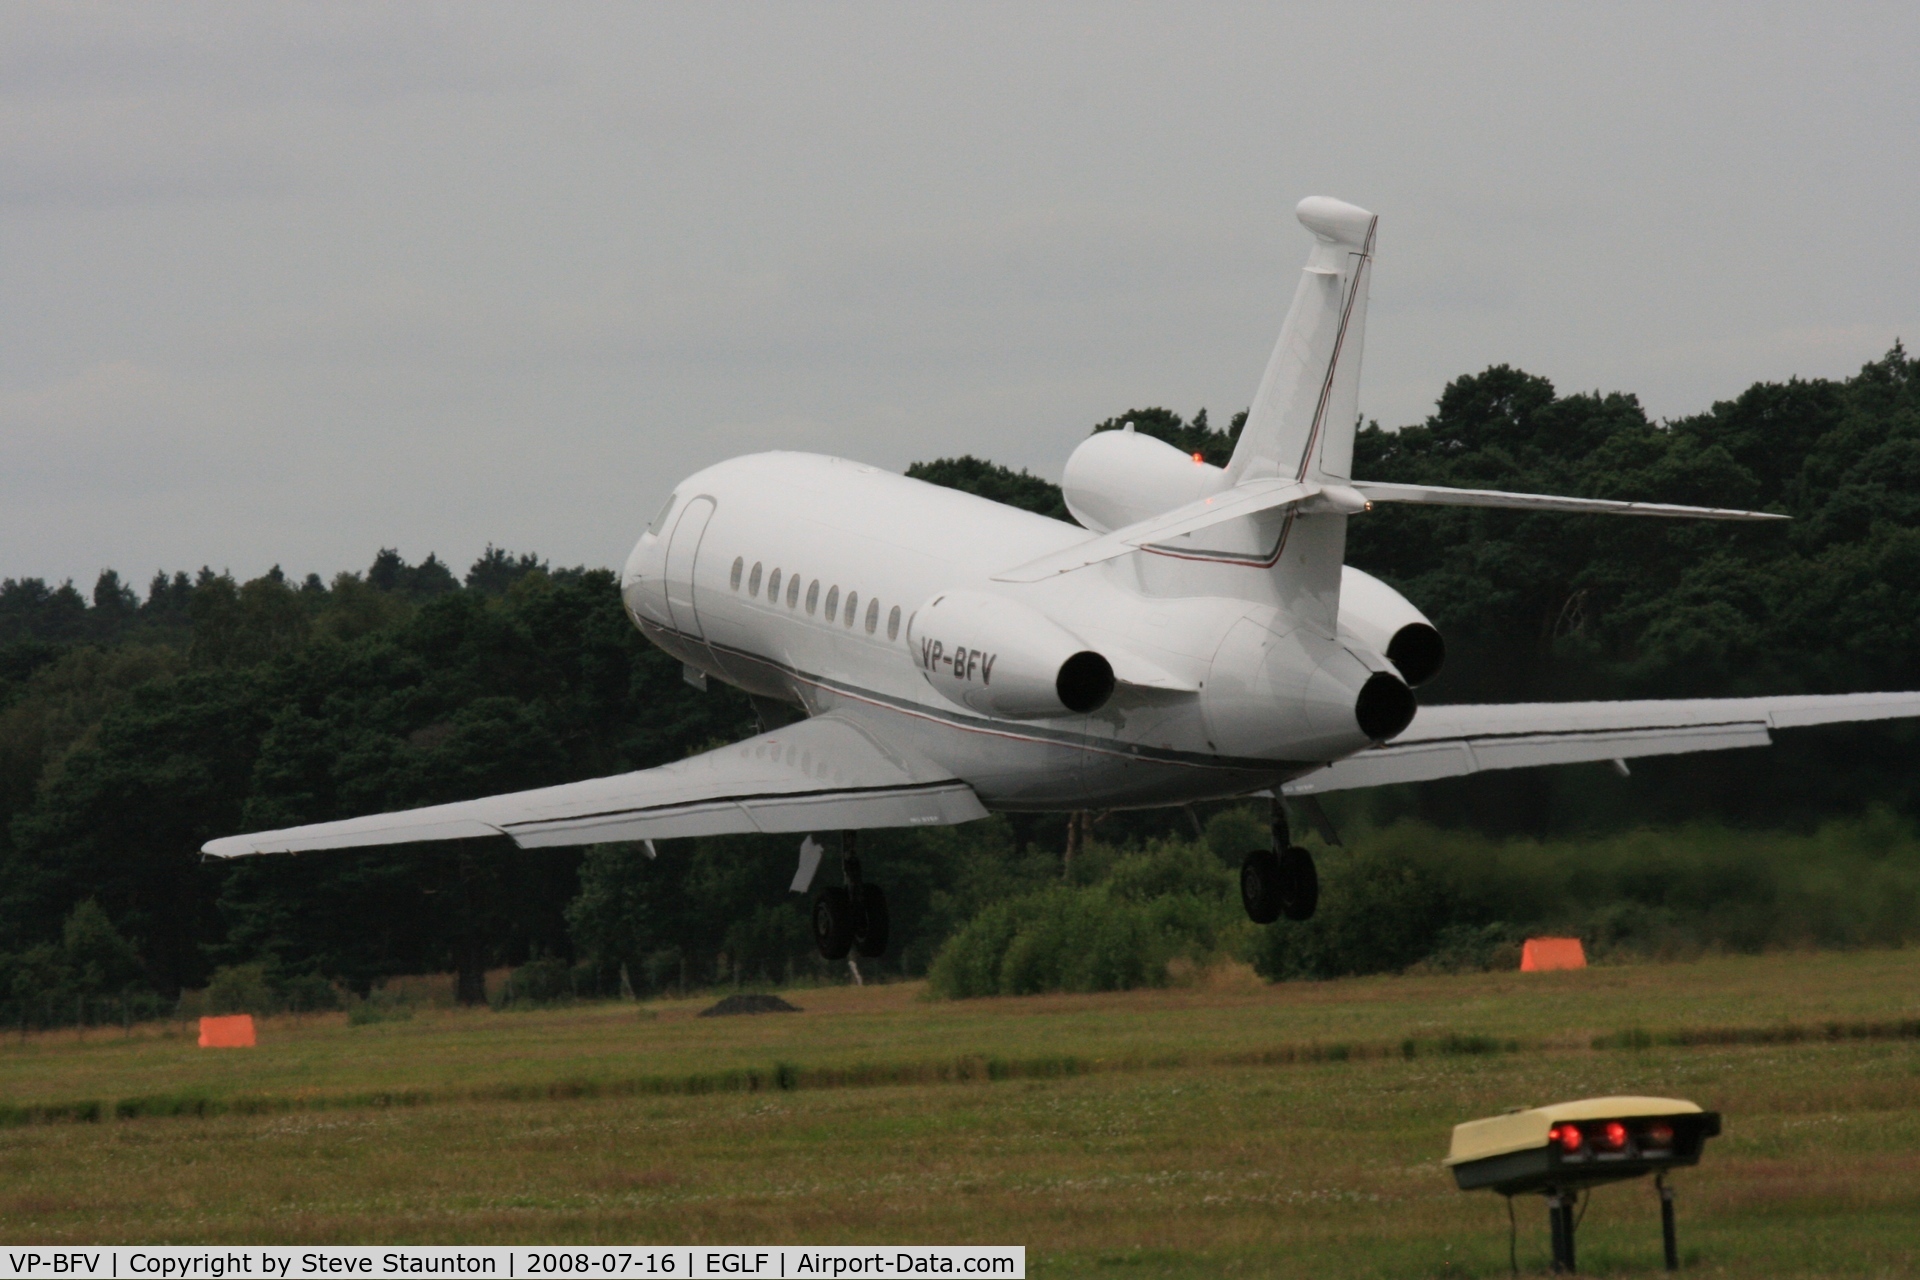 VP-BFV, 2002 Dassault Falcon 900EX C/N 111, Taken at Farnborough Airshow on the Wednesday trade day, 16th July 2009